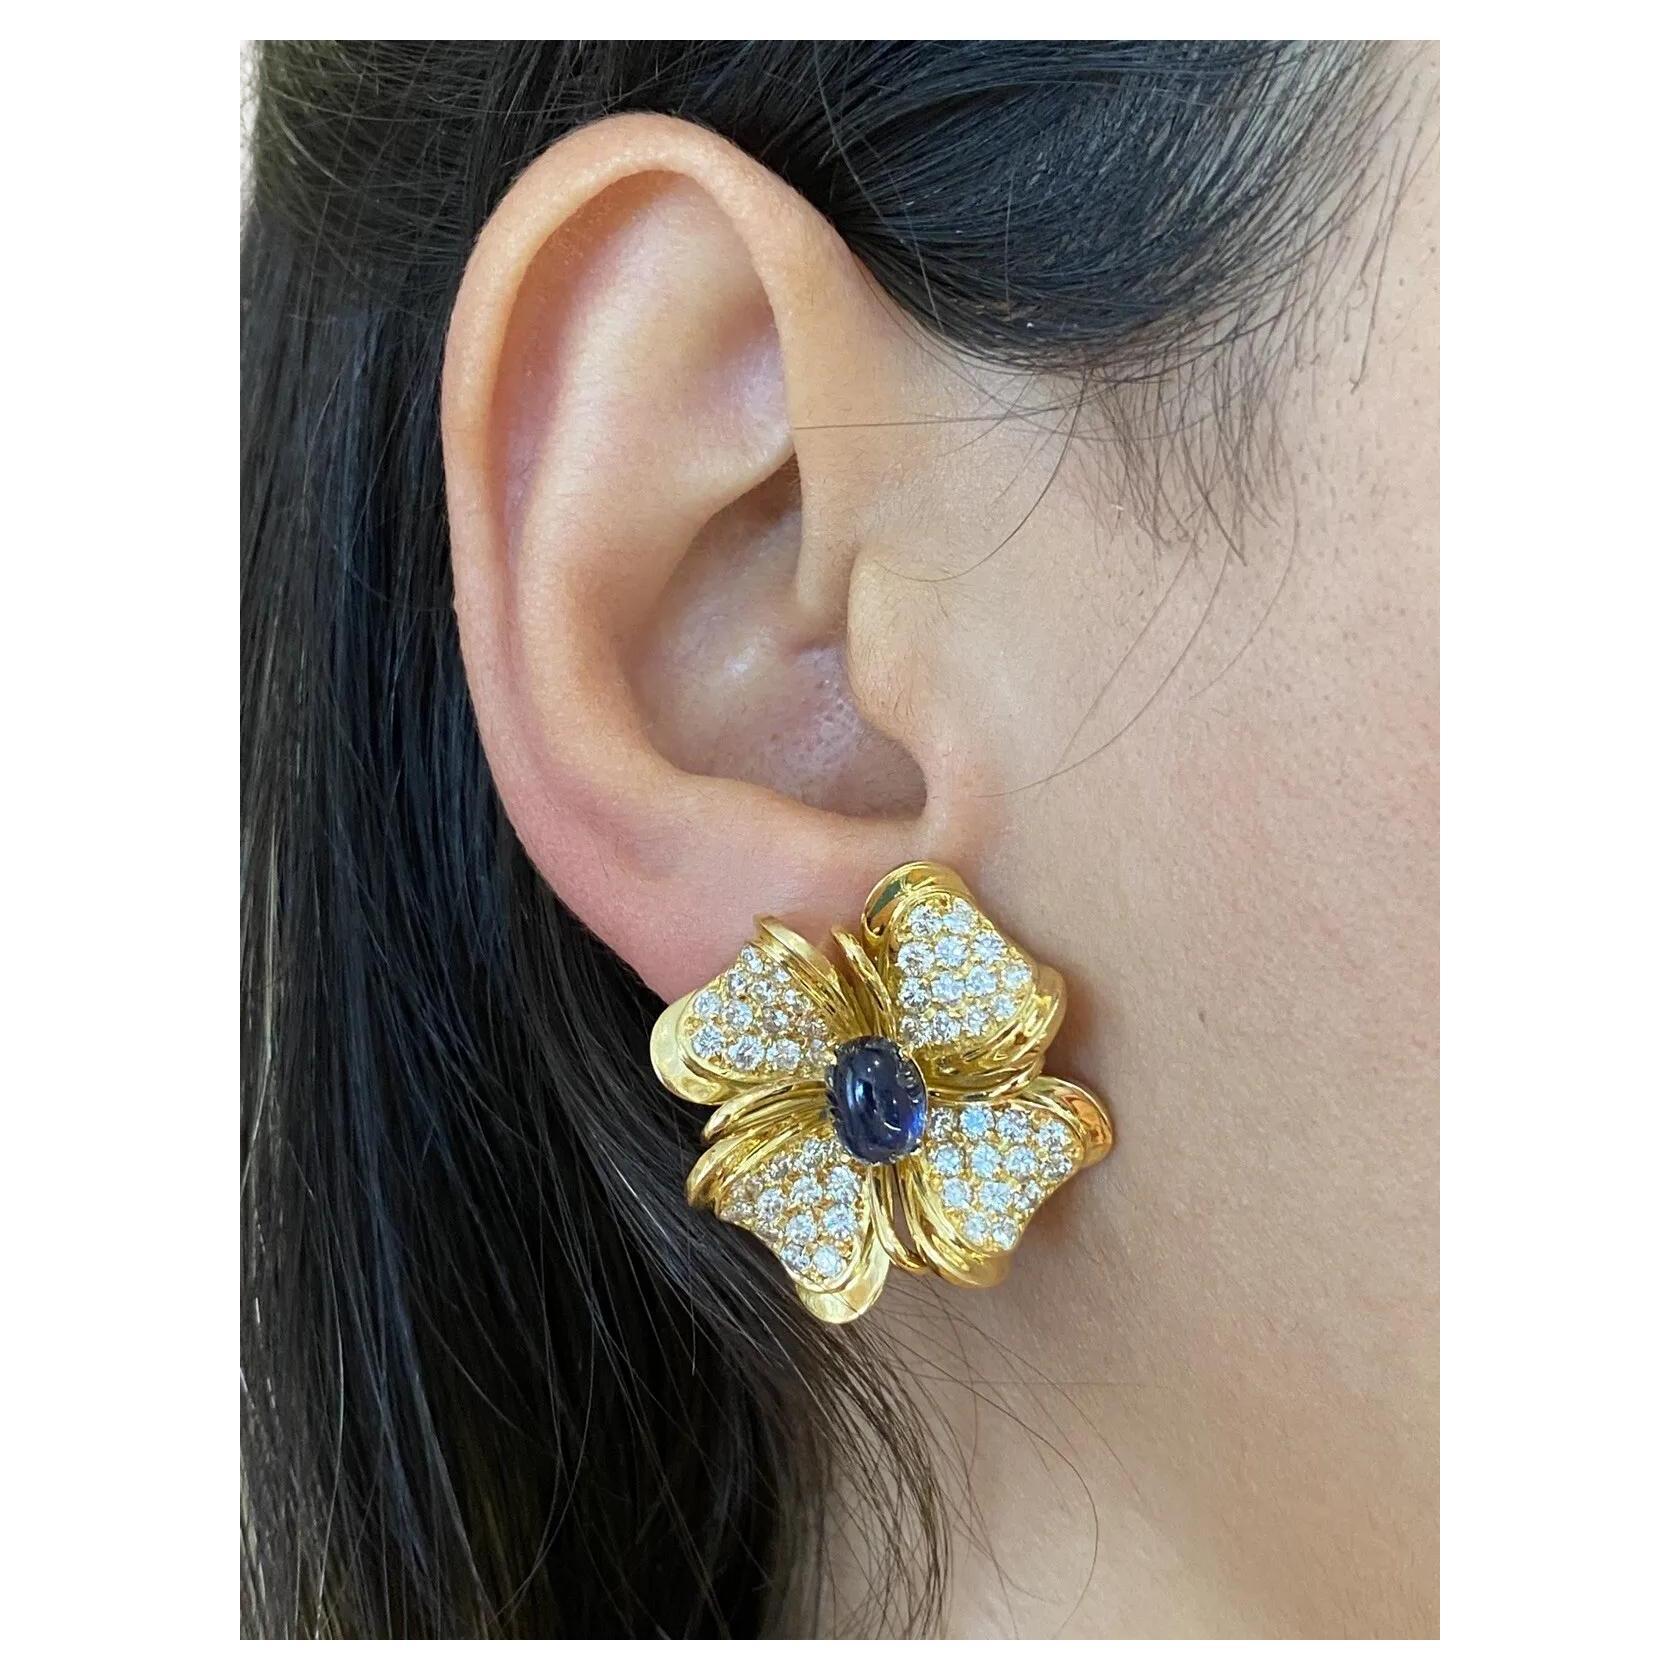 Large Diamond and Sapphire Flower Earrings in 18k Yellow Gold

Sapphire and Diamond Flower Earrings features Round Brilliant Diamonds Pave set in a Flower design with Oval shaped Natural Cabochon Blue Sapphire in center set in 18k Yellow Gold. The